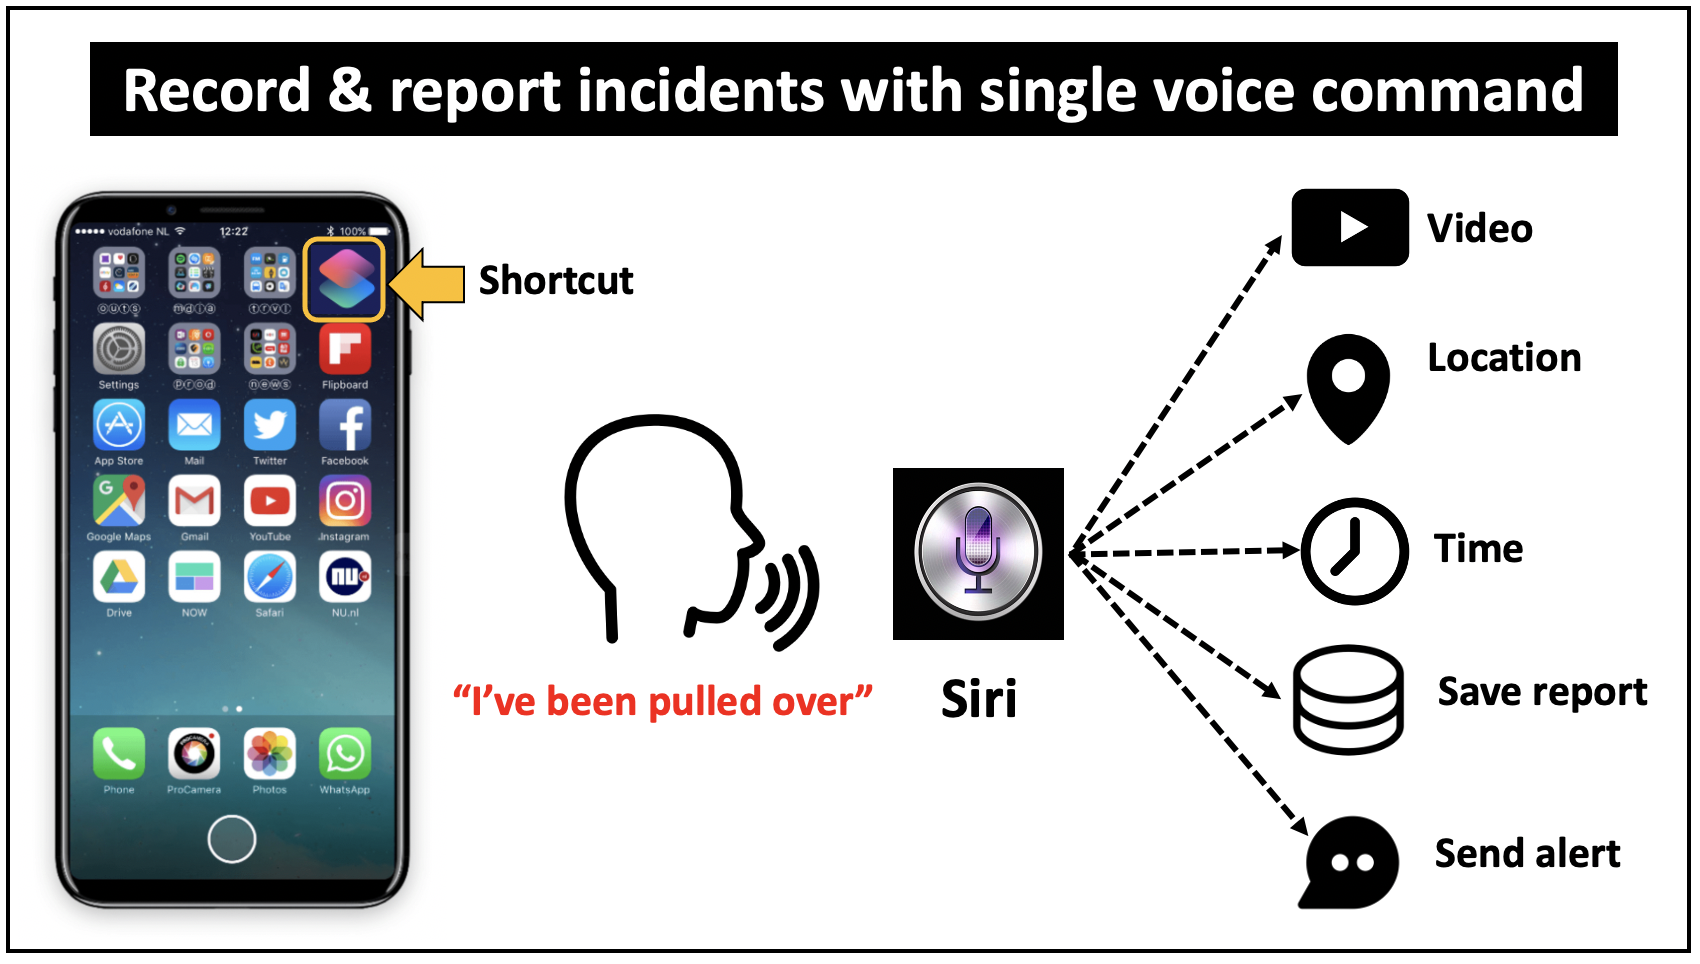 Record and share recordings of incidents with a single voice command on your iPhone using Siri